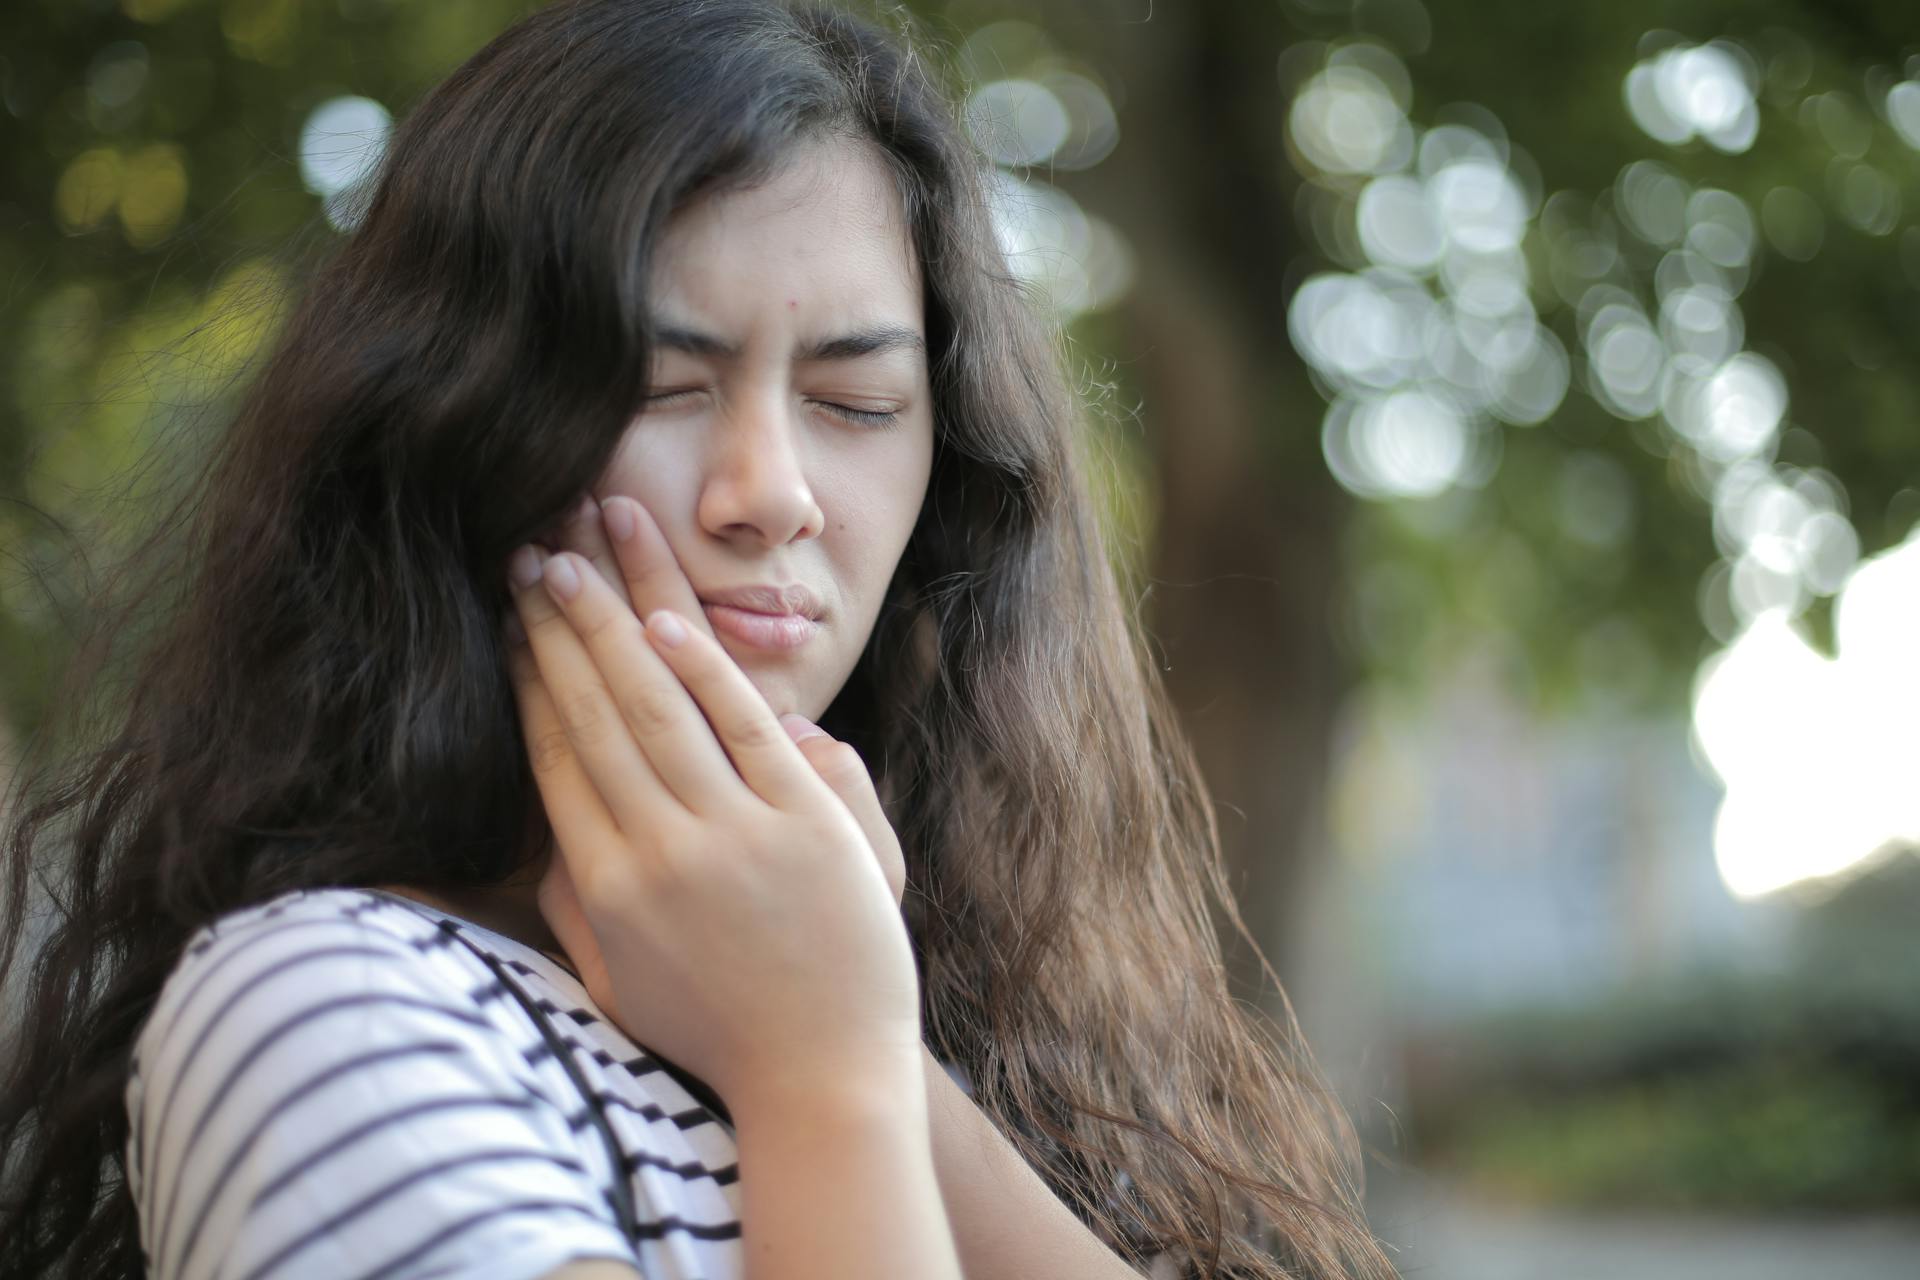 What Are Temporomandibular Joint Disorders, and Why Are They Difficult To Treat?